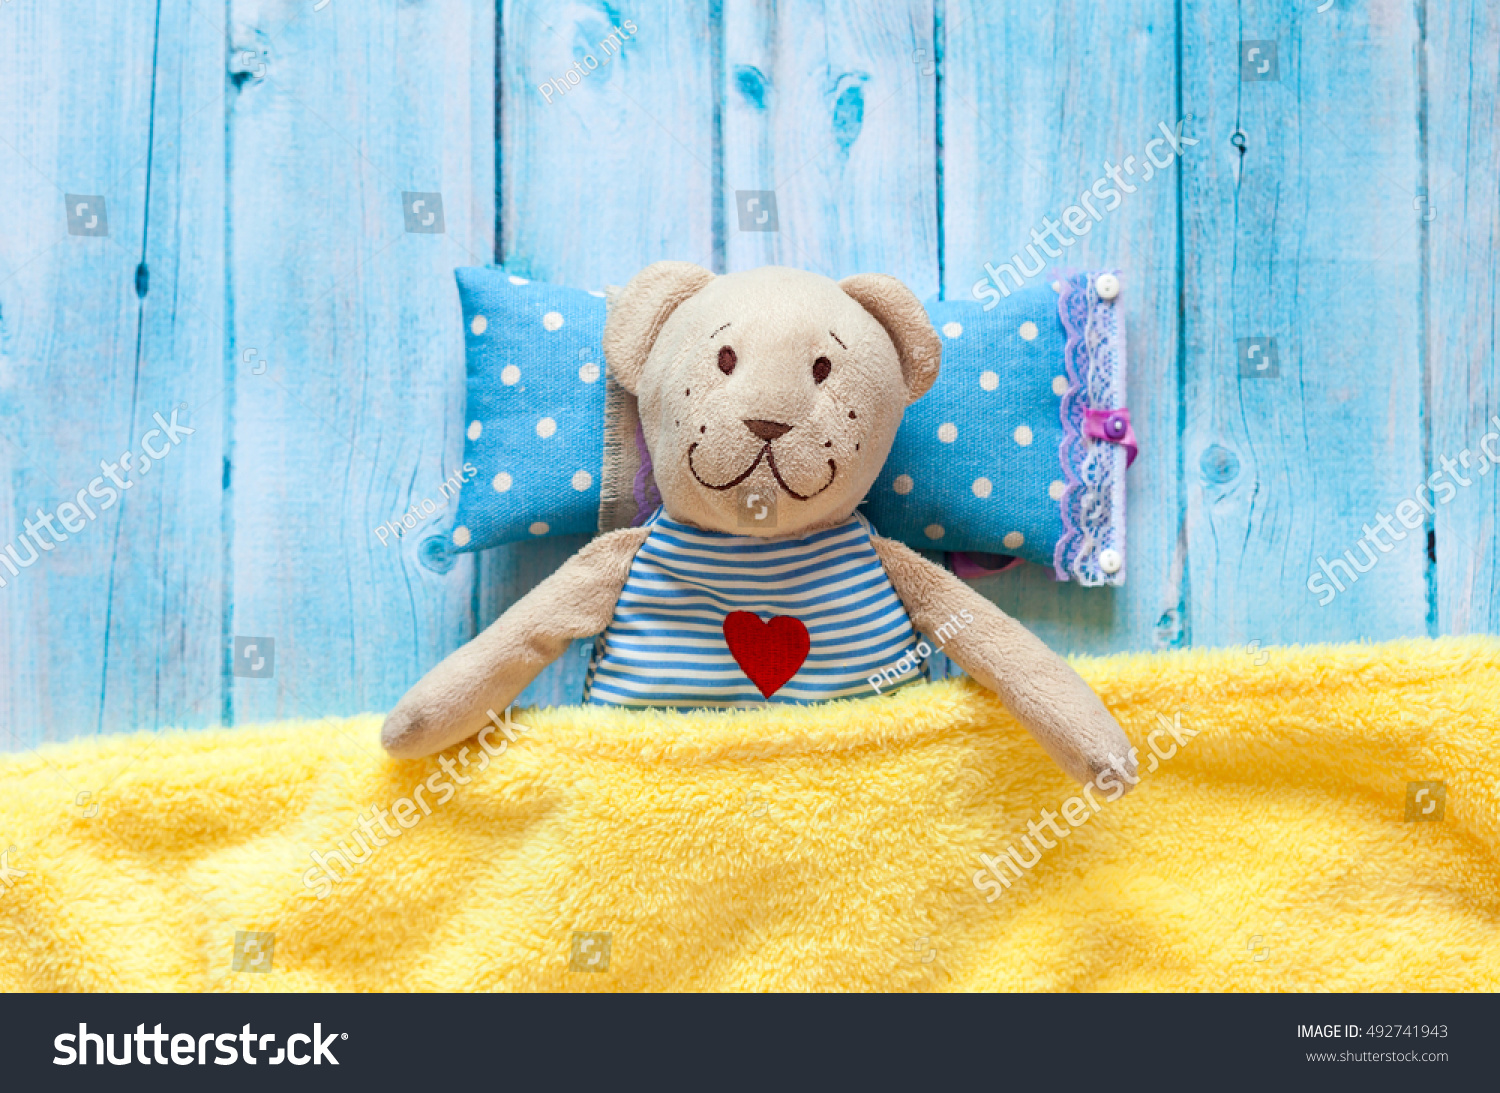 Childrens Soft Toy Teddy Bear Bed Stock Photo 492741943 Shutterstock